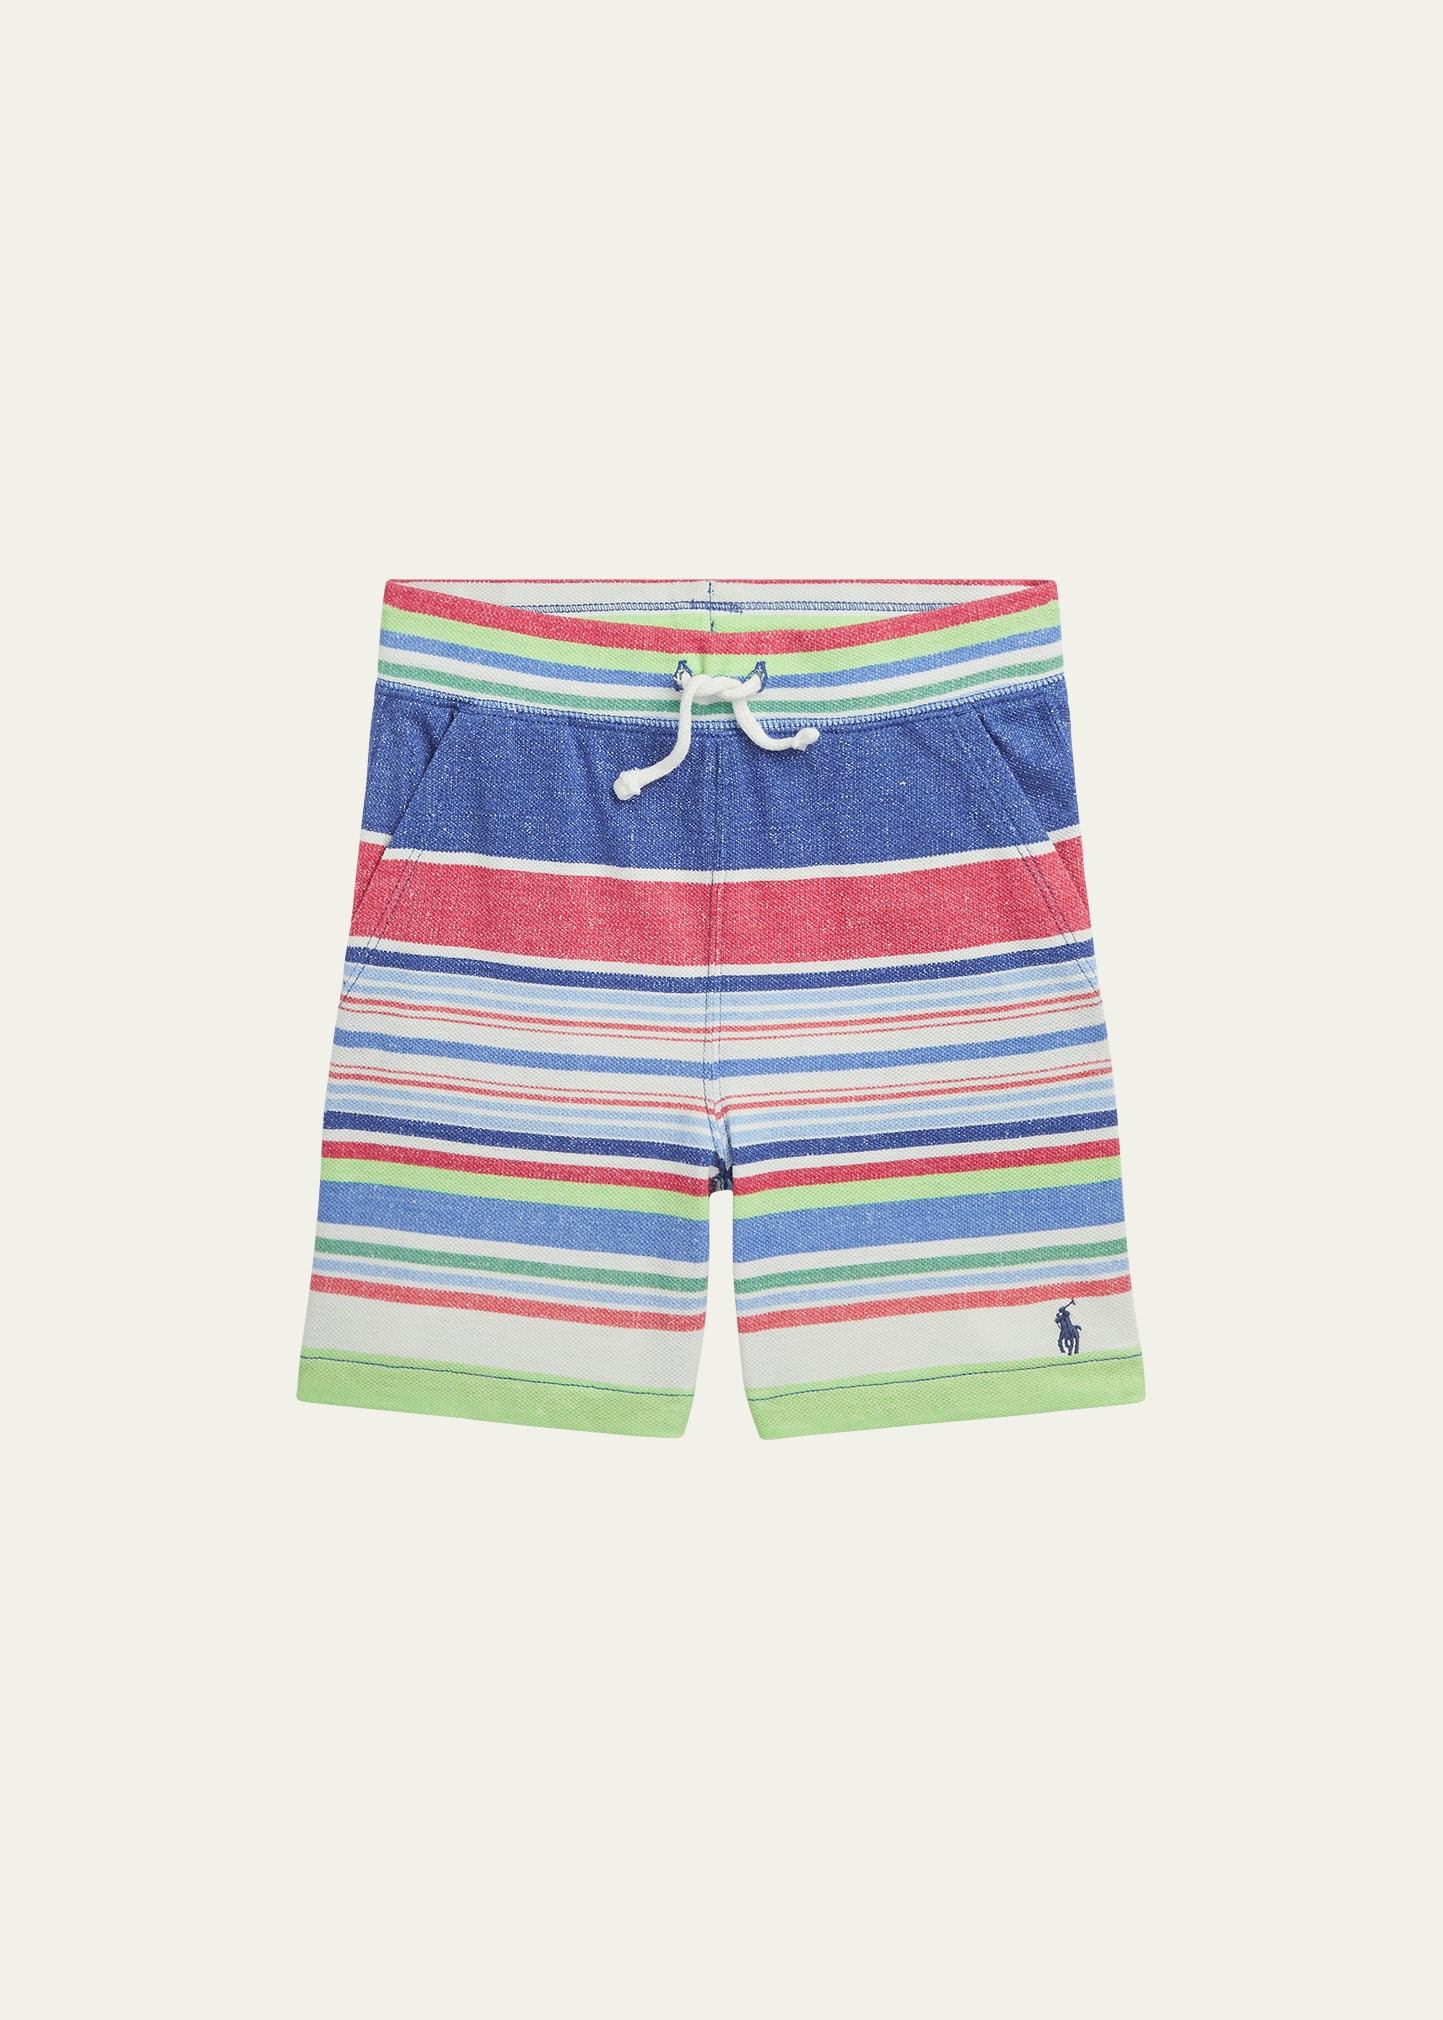 Boy's Multicolor Striped Embroidered Mesh Shorts, Size 2-4